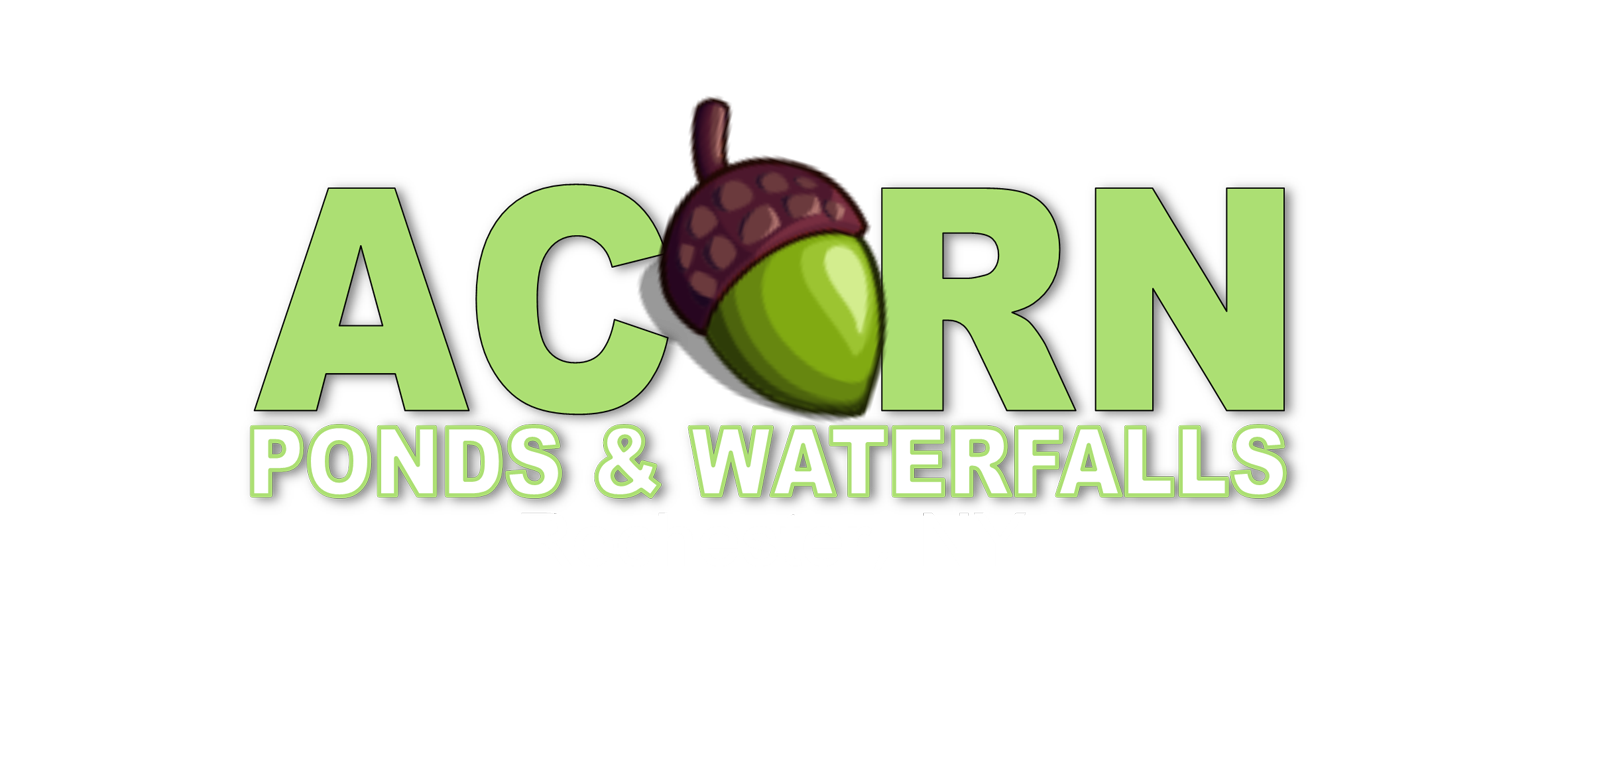 Backyard Fish Pond - Pondless Water Feature Contractor/Company Rochester NY - Acorn Ponds & Waterfalls